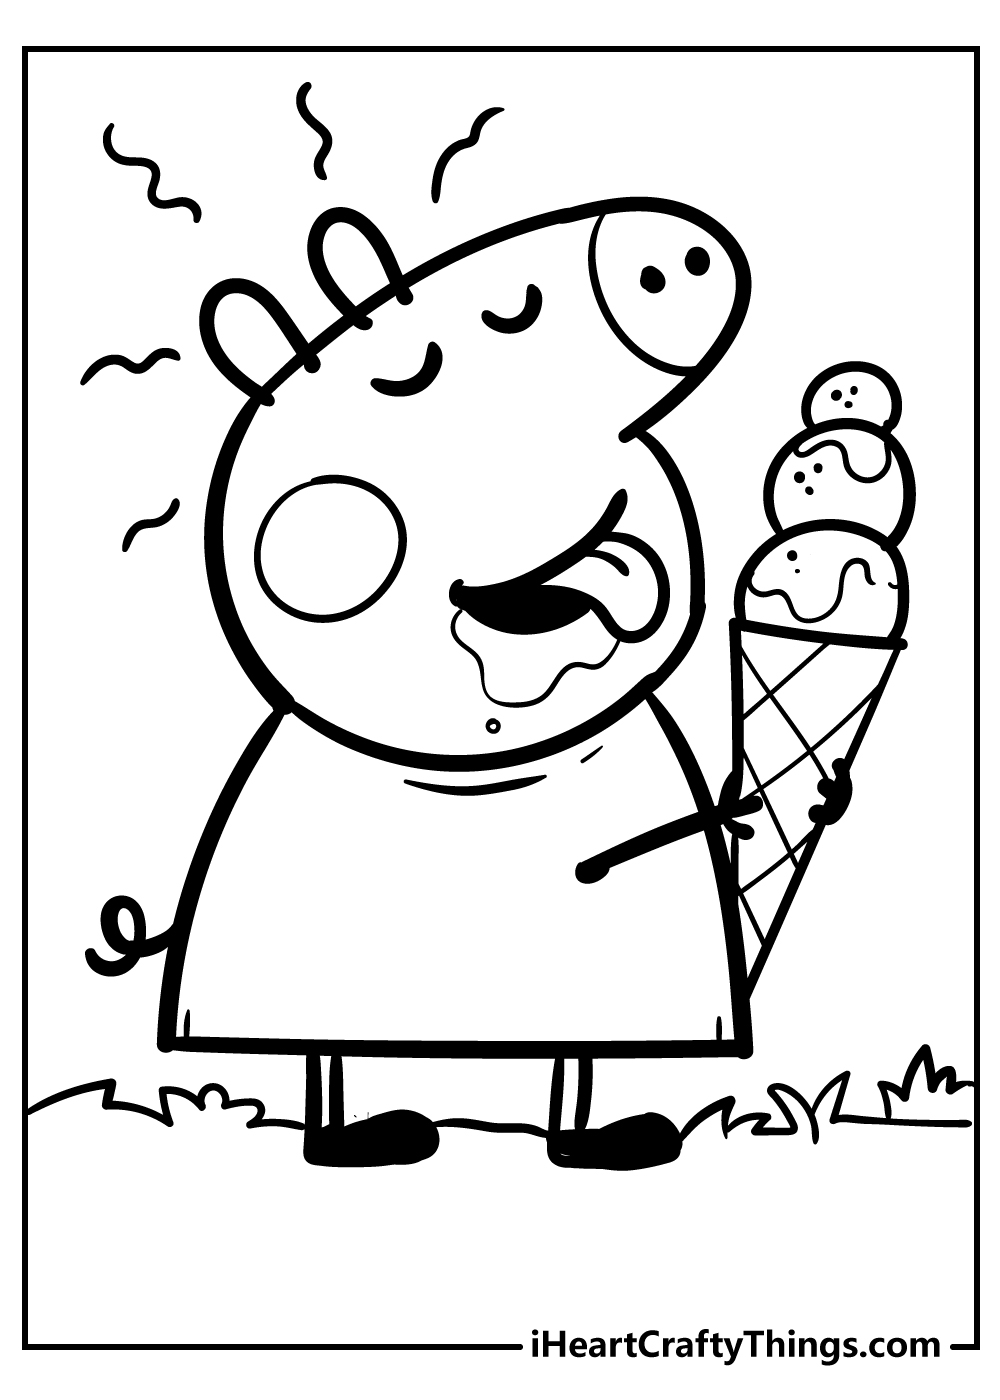 Peppa Pig coloring pages for preschoolers free printable